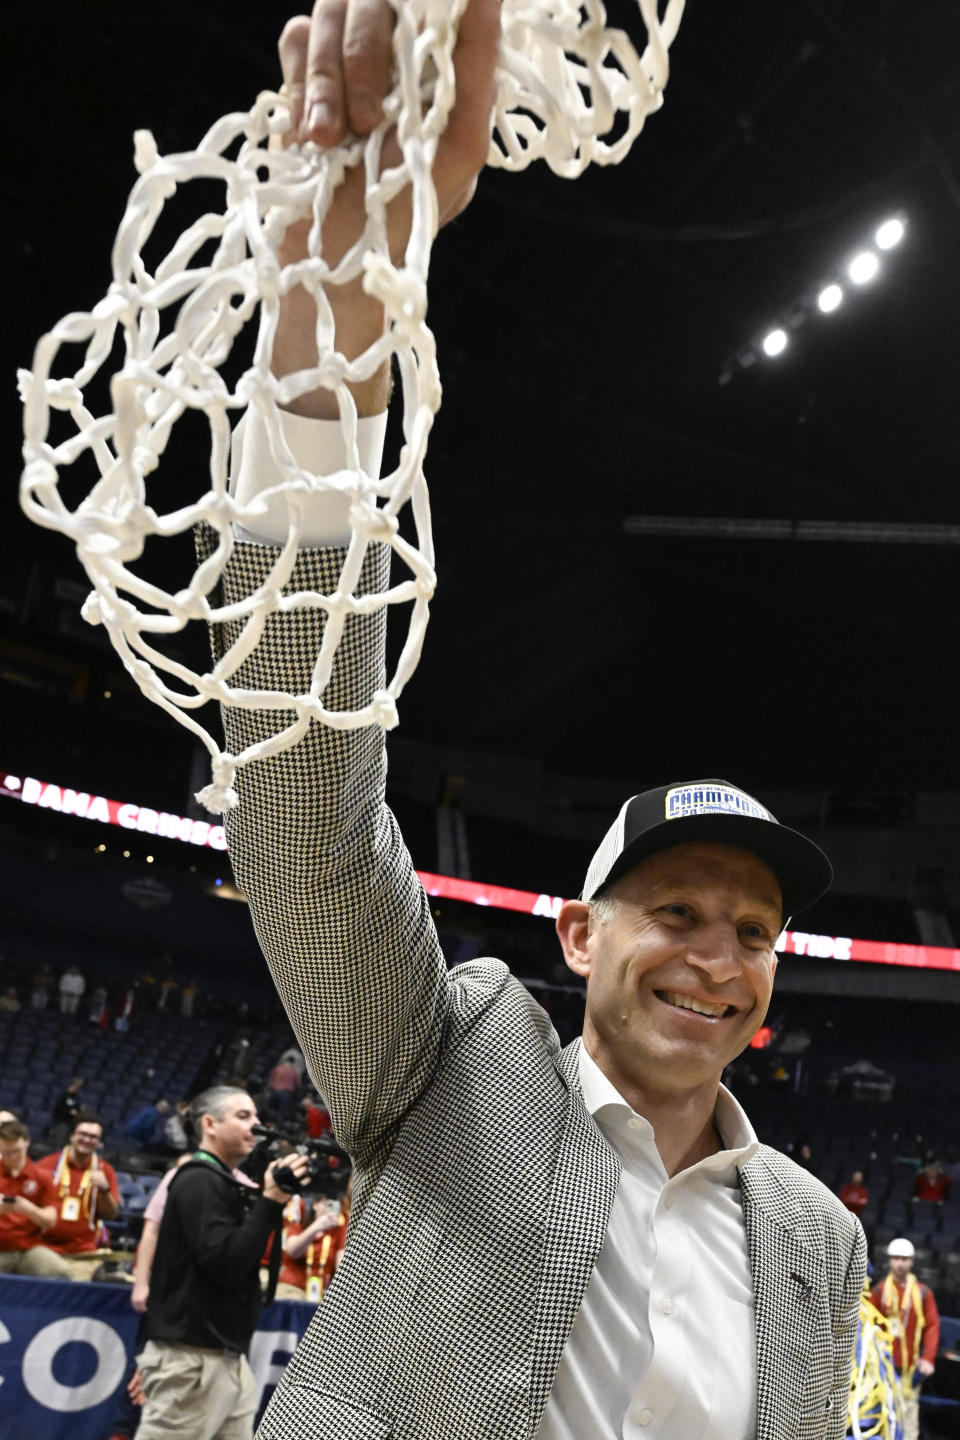 Alabama head coach Nate Oats holds up the net after an NCAA college basketball game against Texas A&M in the finals of the Southeastern Conference Tournament, Sunday, March 12, 2023, in Nashville, Tenn. Alabama won 82-63. (AP Photo/John Amis)